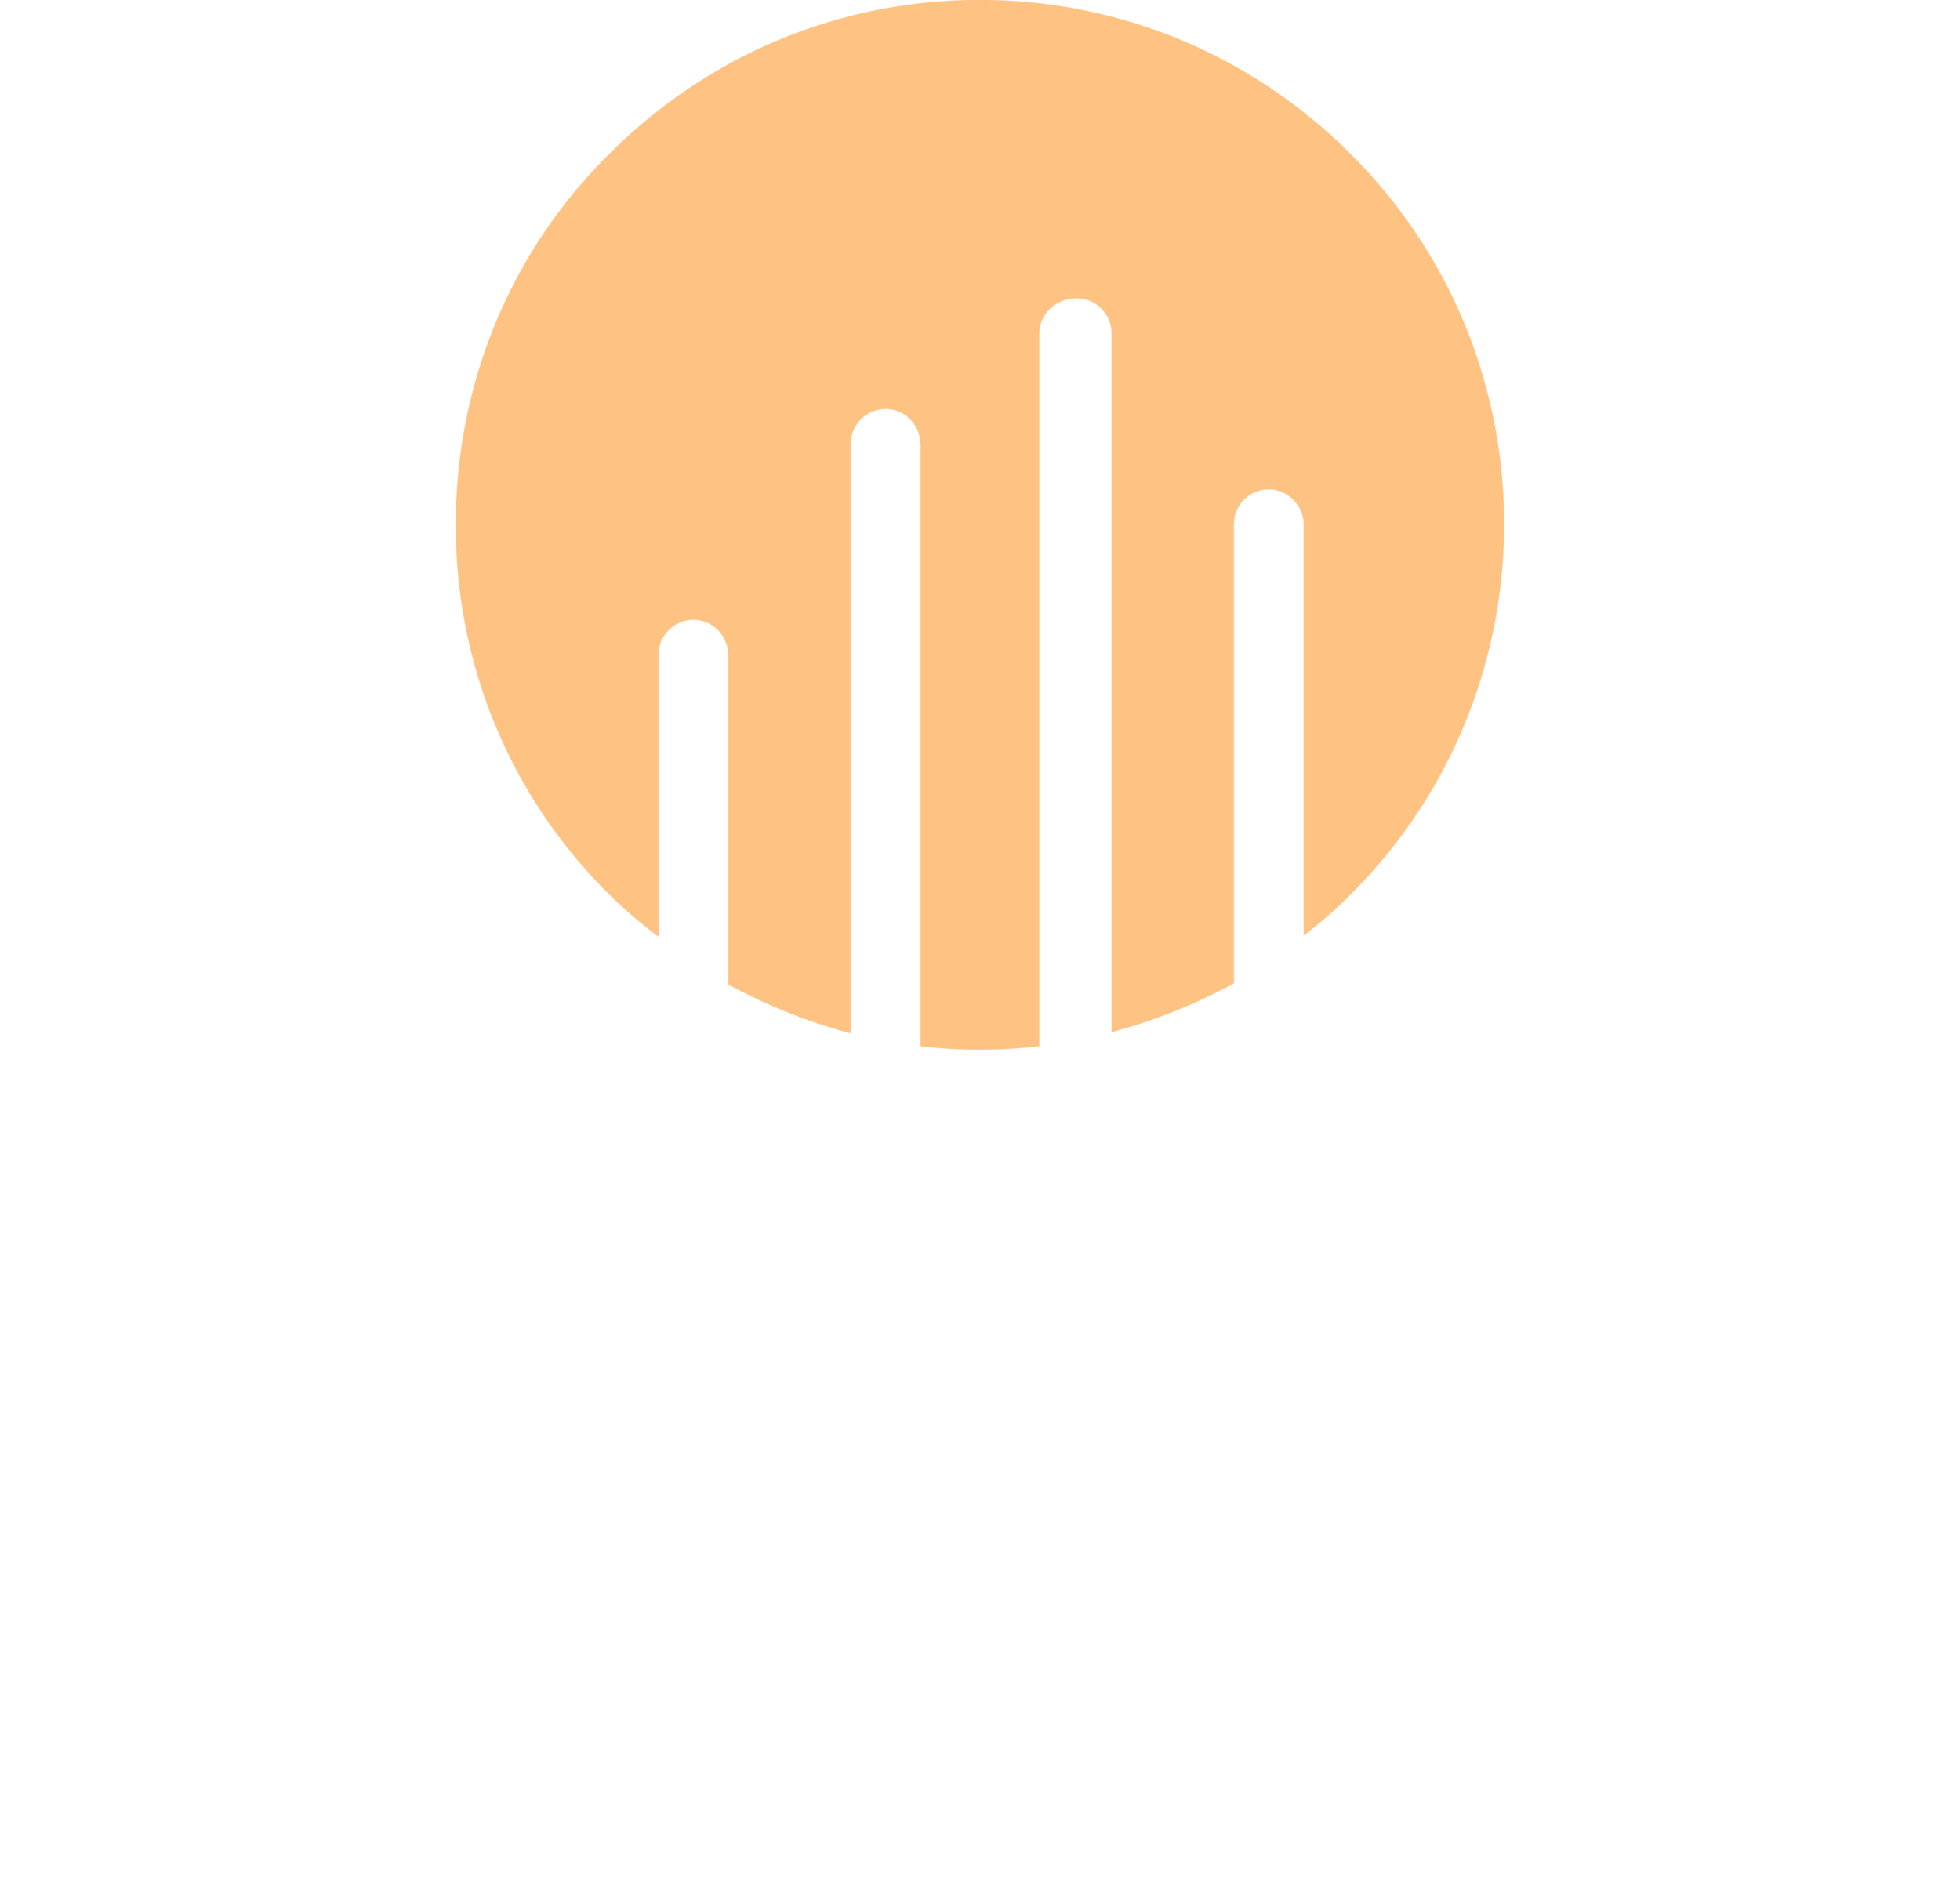 THE MOMENT